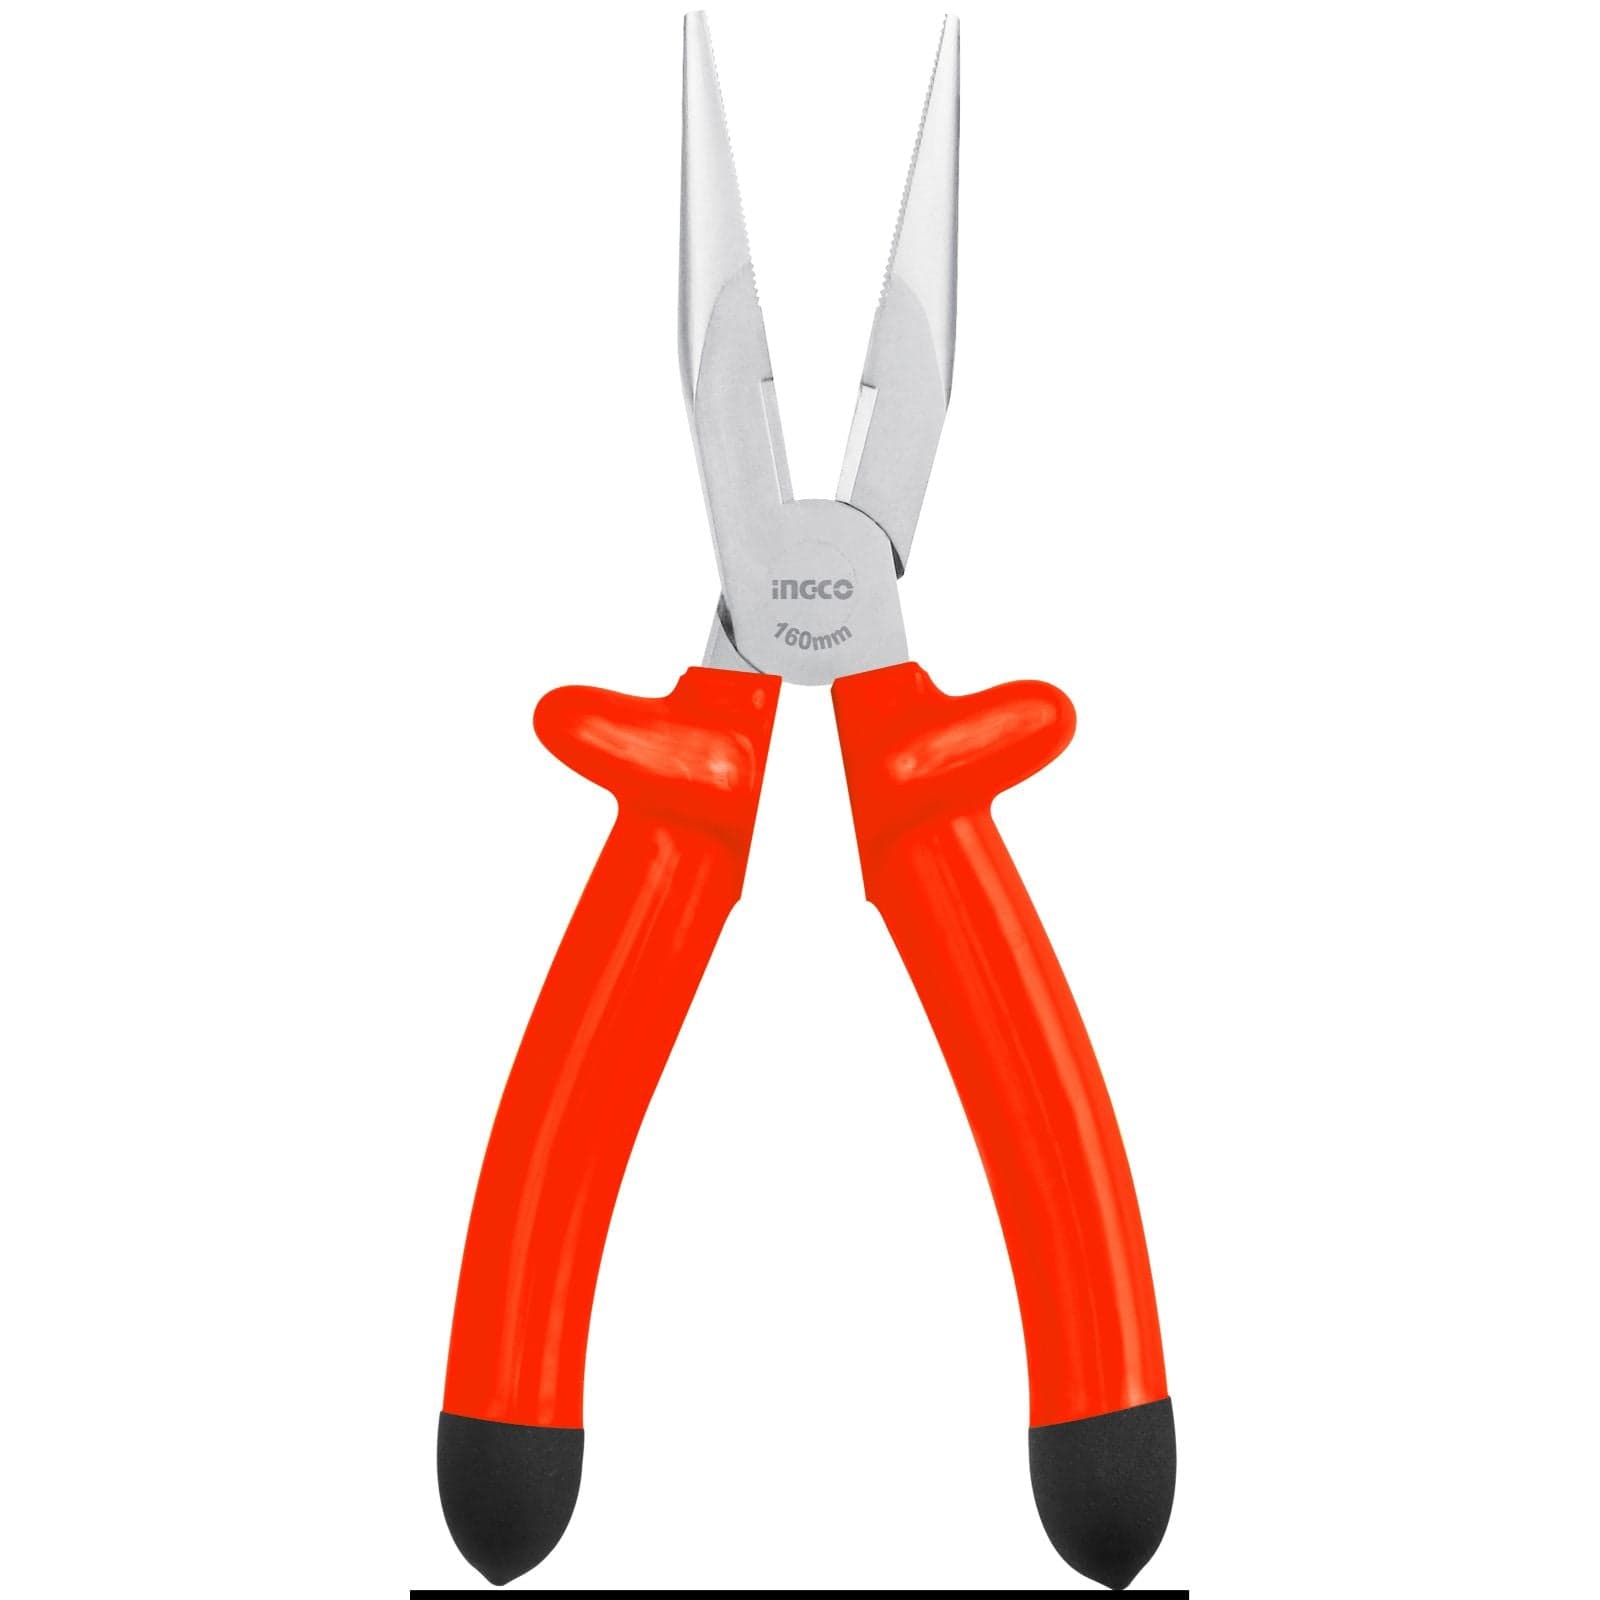 Ingco Insulated Long Nose Plier - HILNP01200 | Buy Online in Accra, Ghana - Supply Master Pliers Buy Tools hardware Building materials